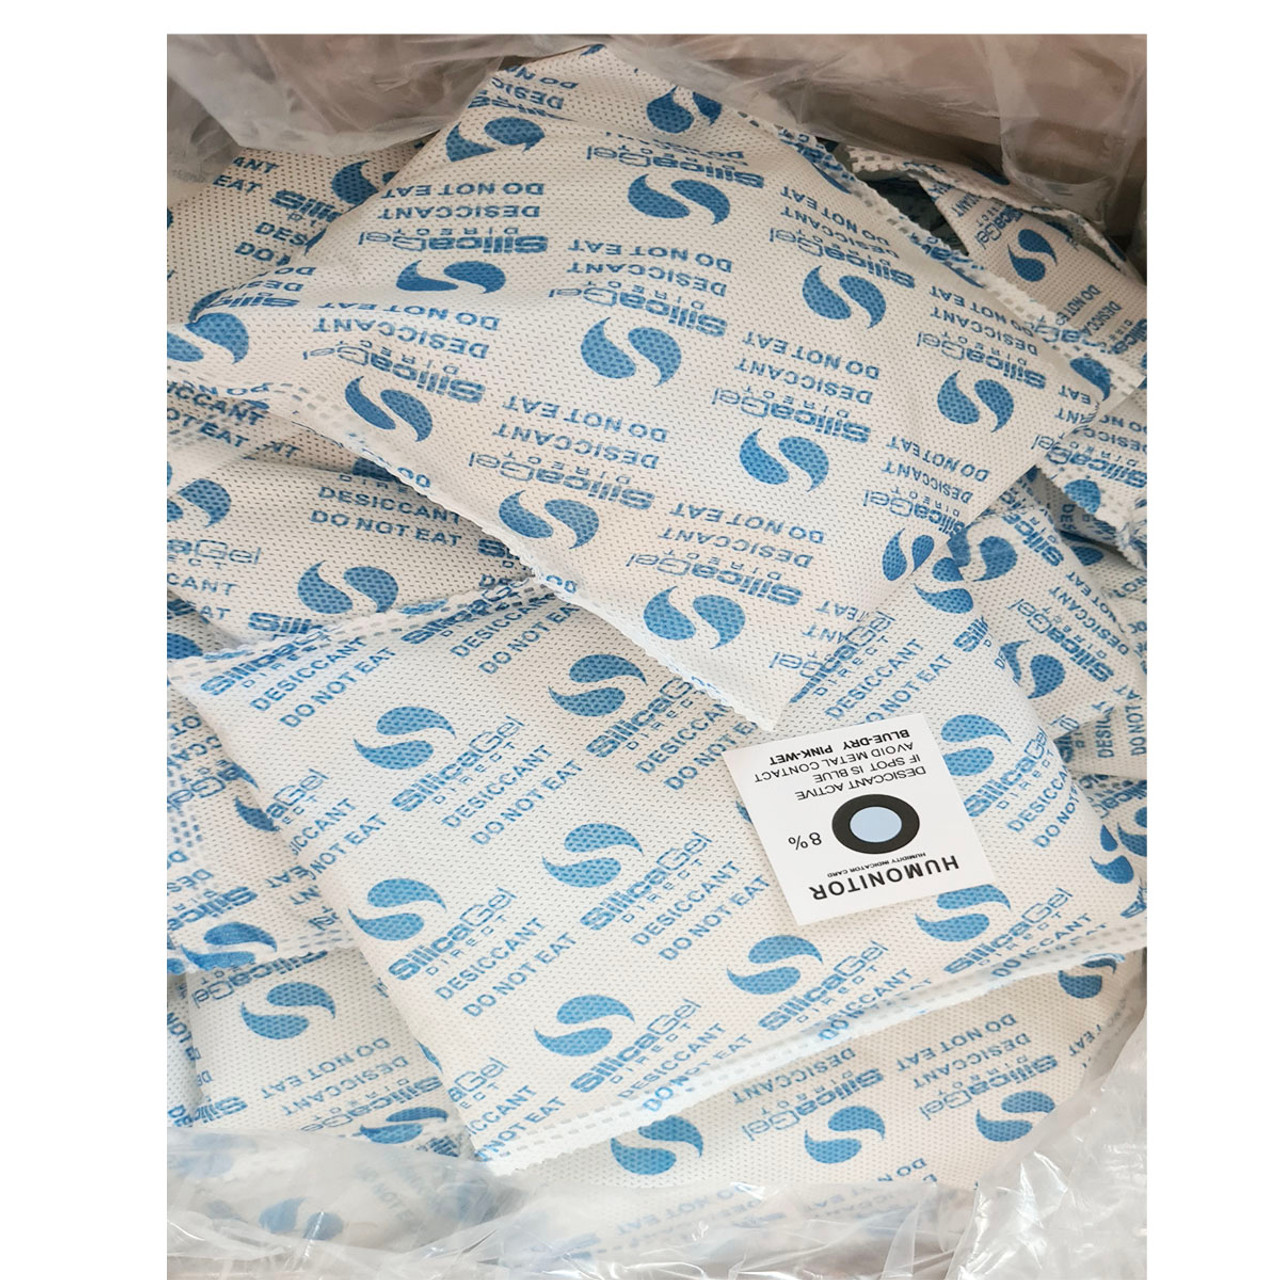 250gm Silica Gel Moisture Absorber Desiccant Packets (Non-Woven)